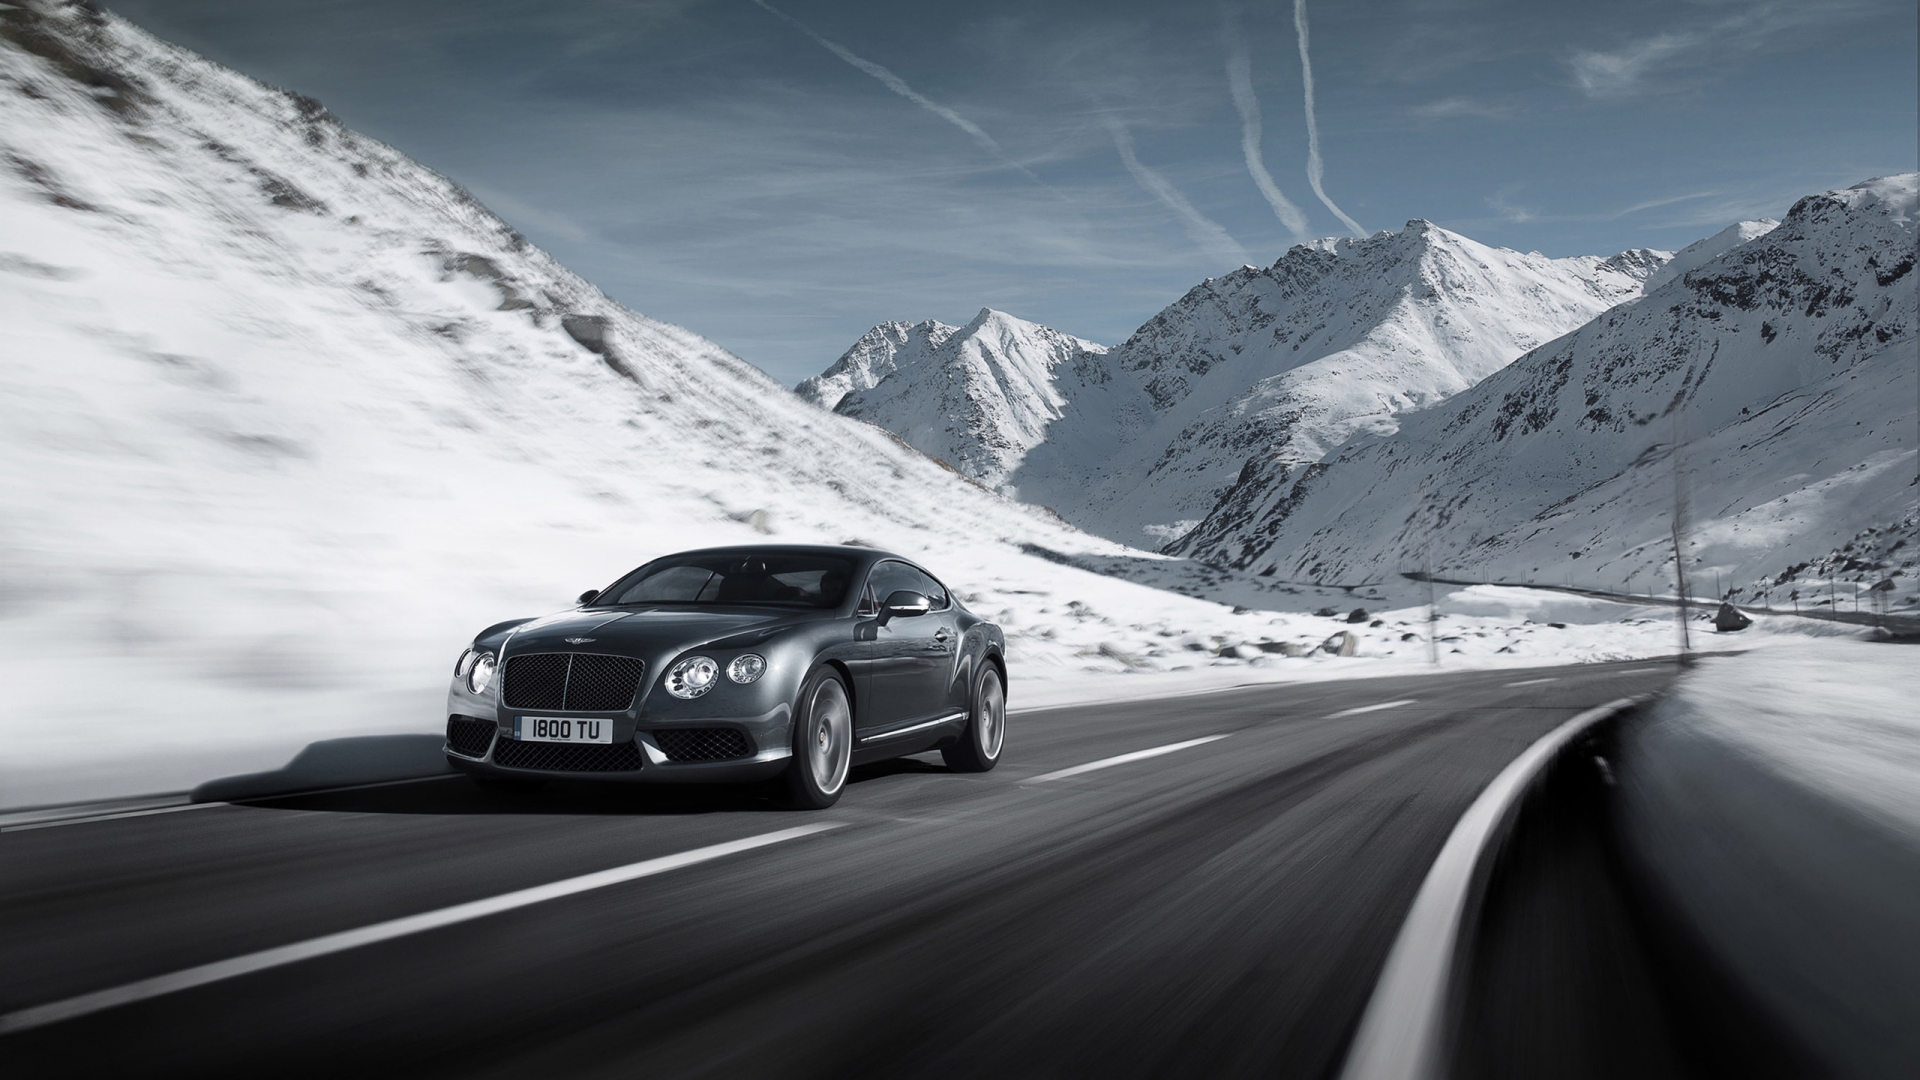 2012 Bentley Continental V8 for 1920 x 1080 HDTV 1080p resolution